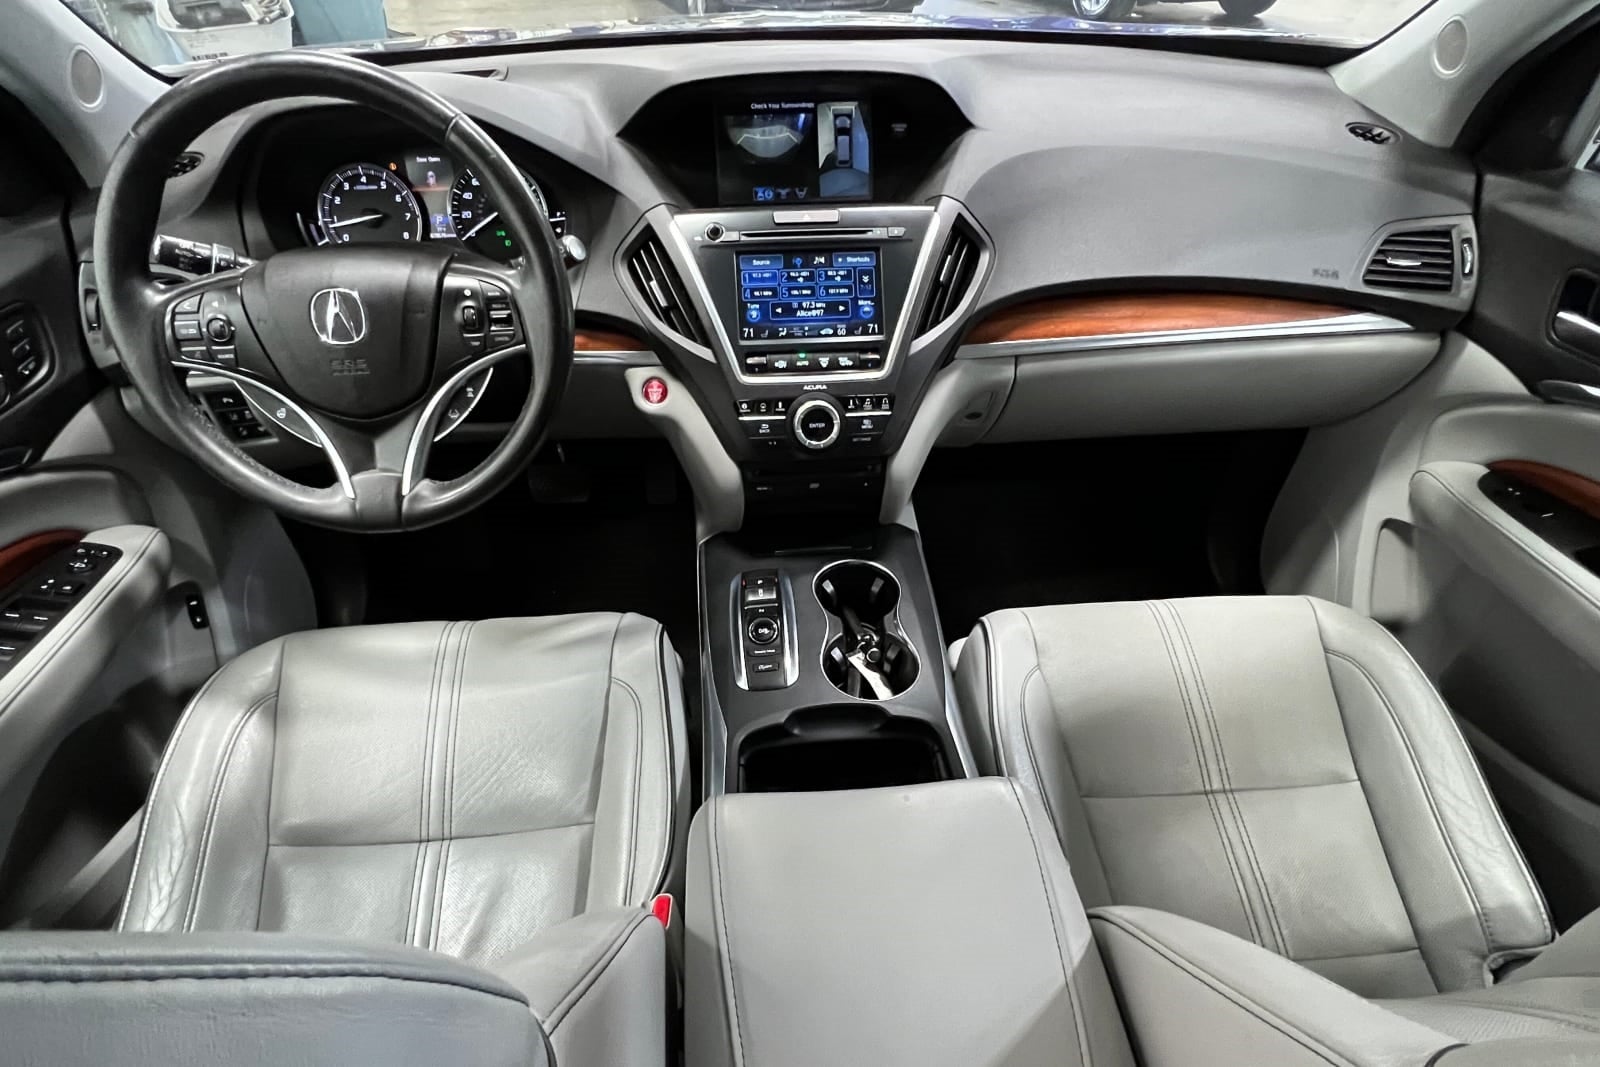 2016 Acura MDX Navigation, used for sale at $32,988 (PC3301)